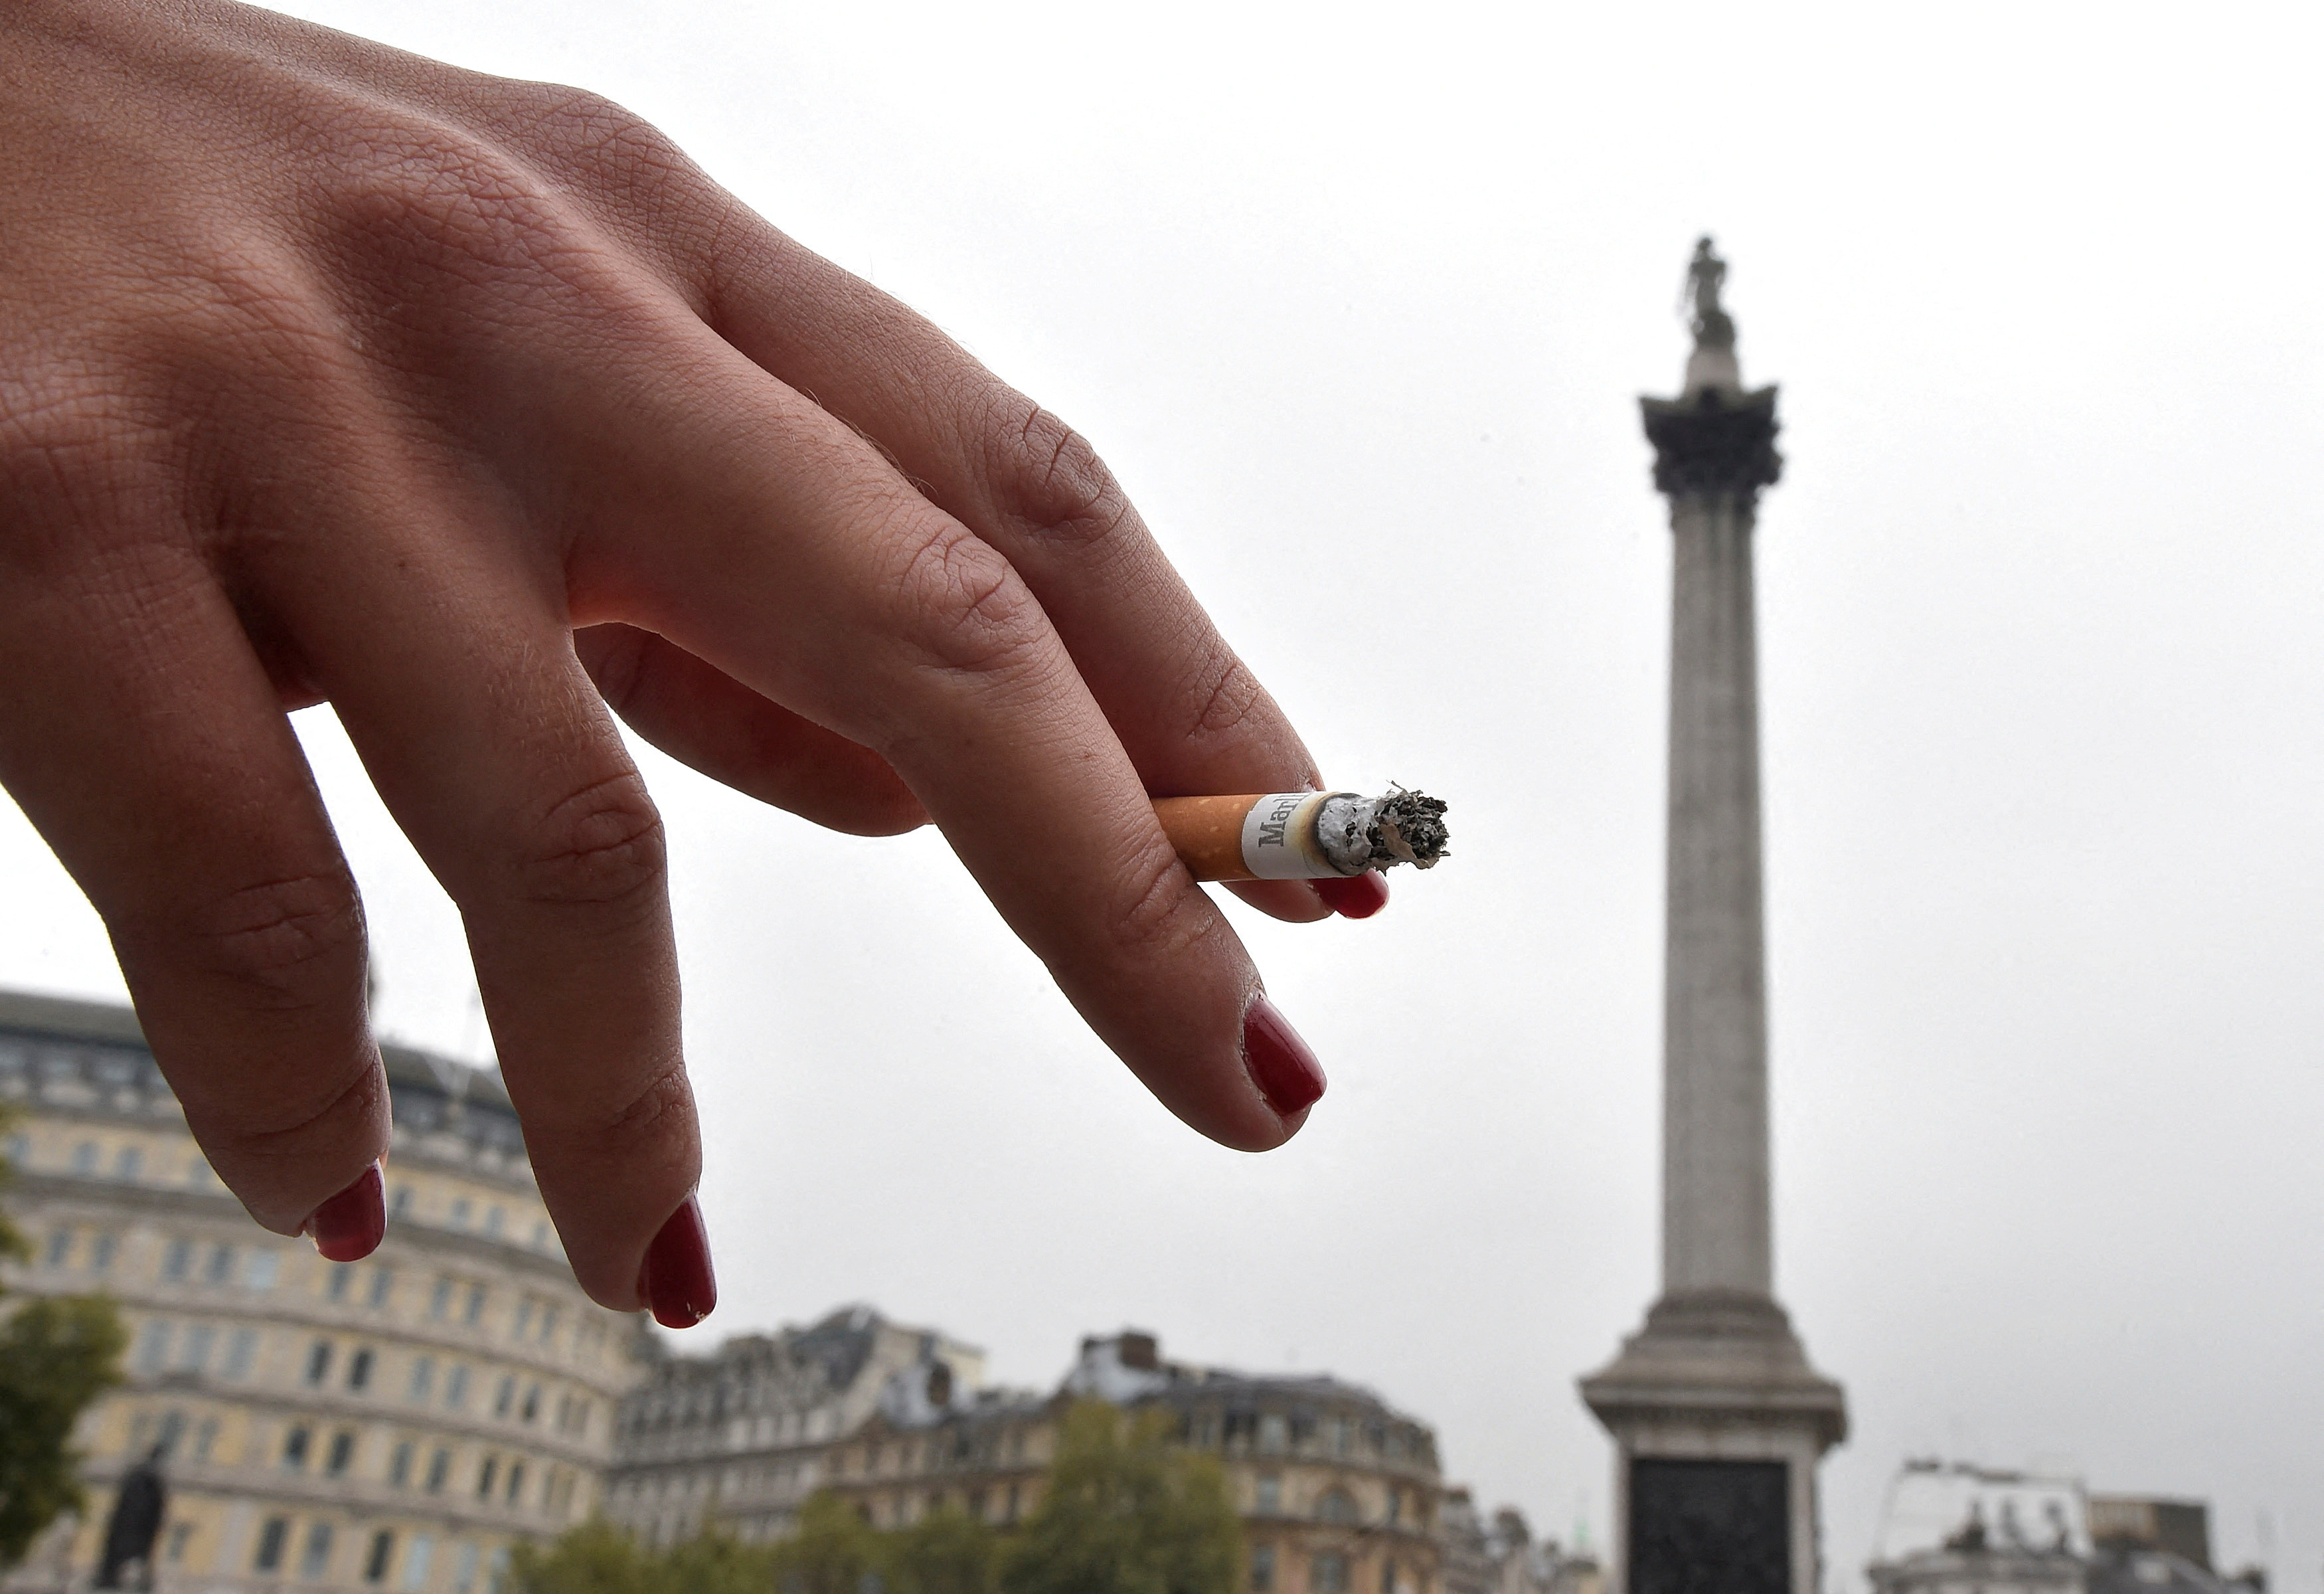 A woman holds her cigarette as she smokes in Trafalgar Square in central London